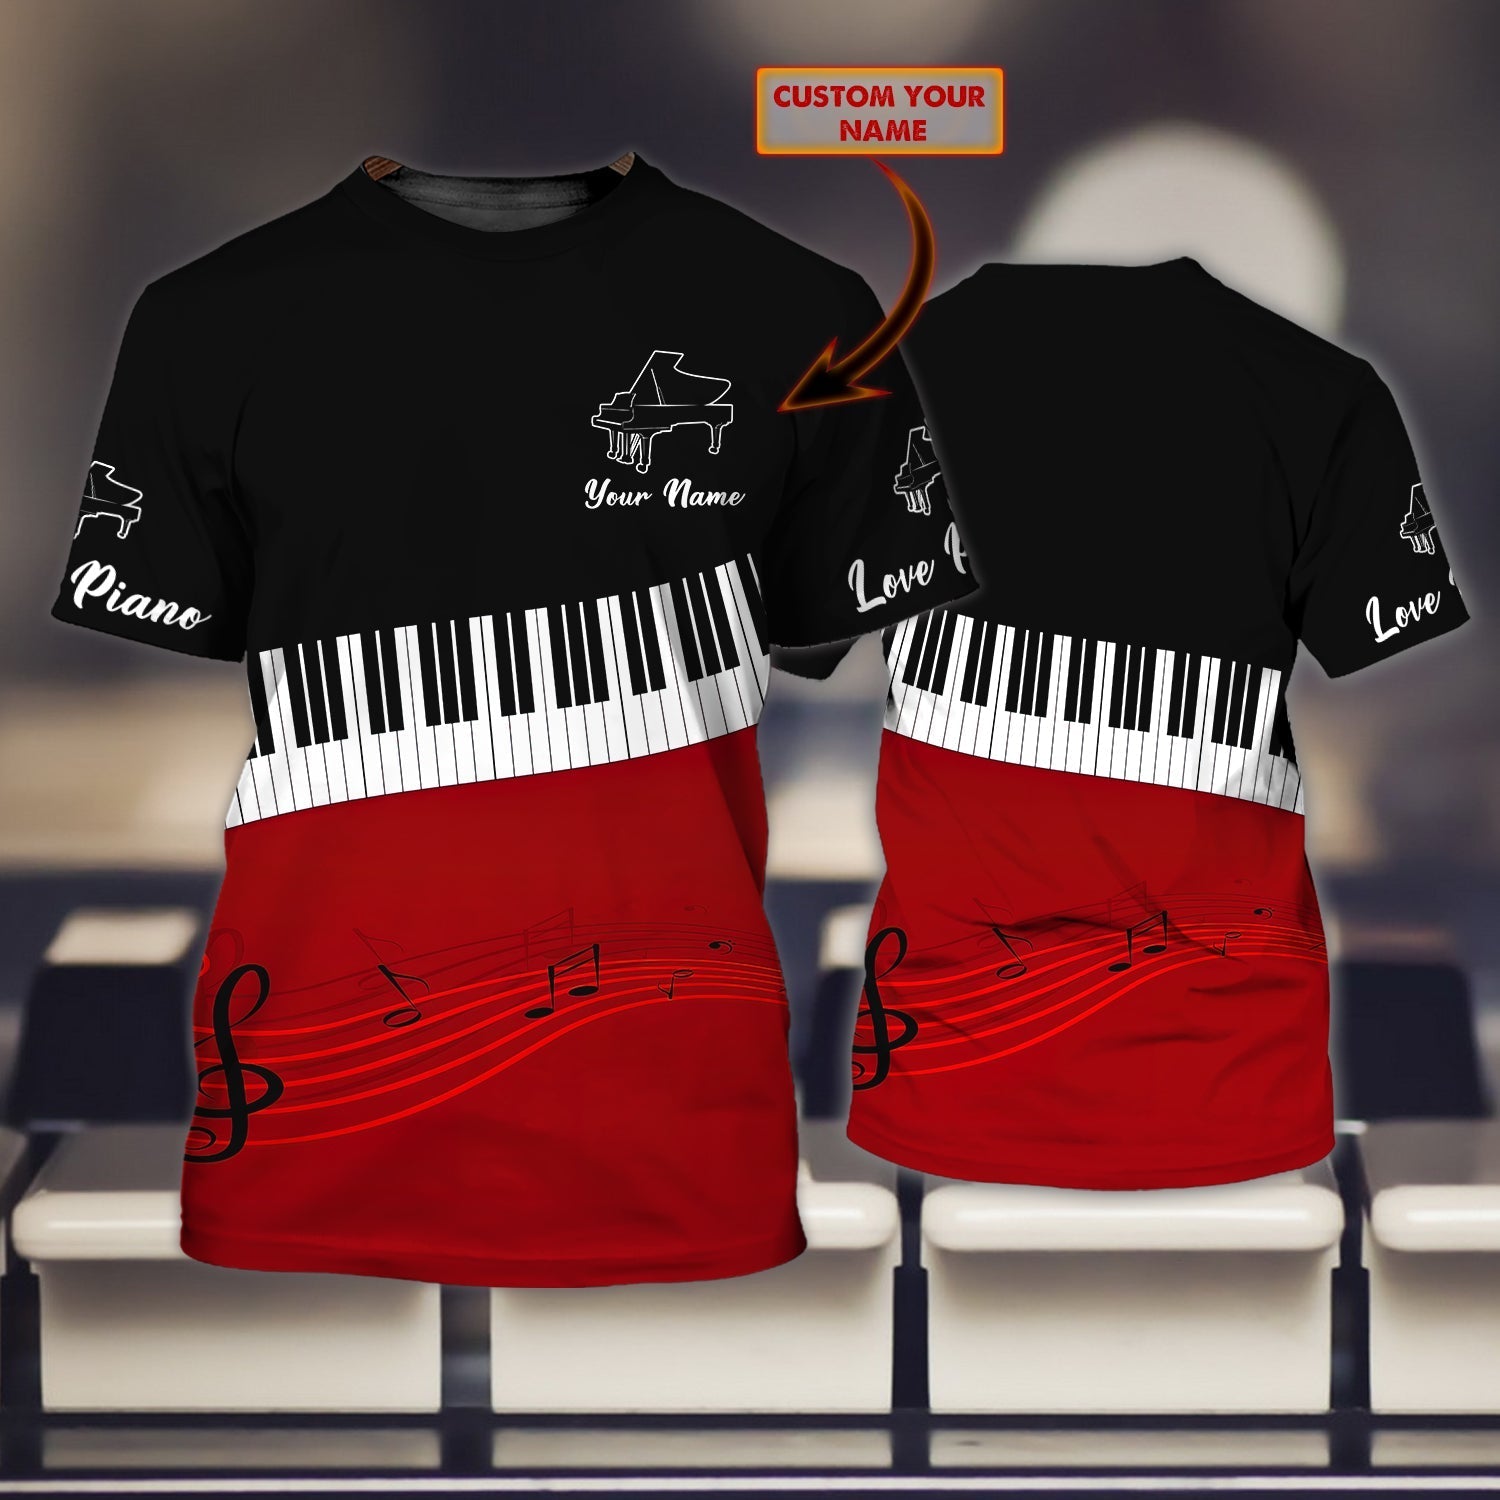 Customized Cool Piano Tshirt For Men And Women/ 3D Shirt For My Pianist Husband/ Piano Shirt For Him Her